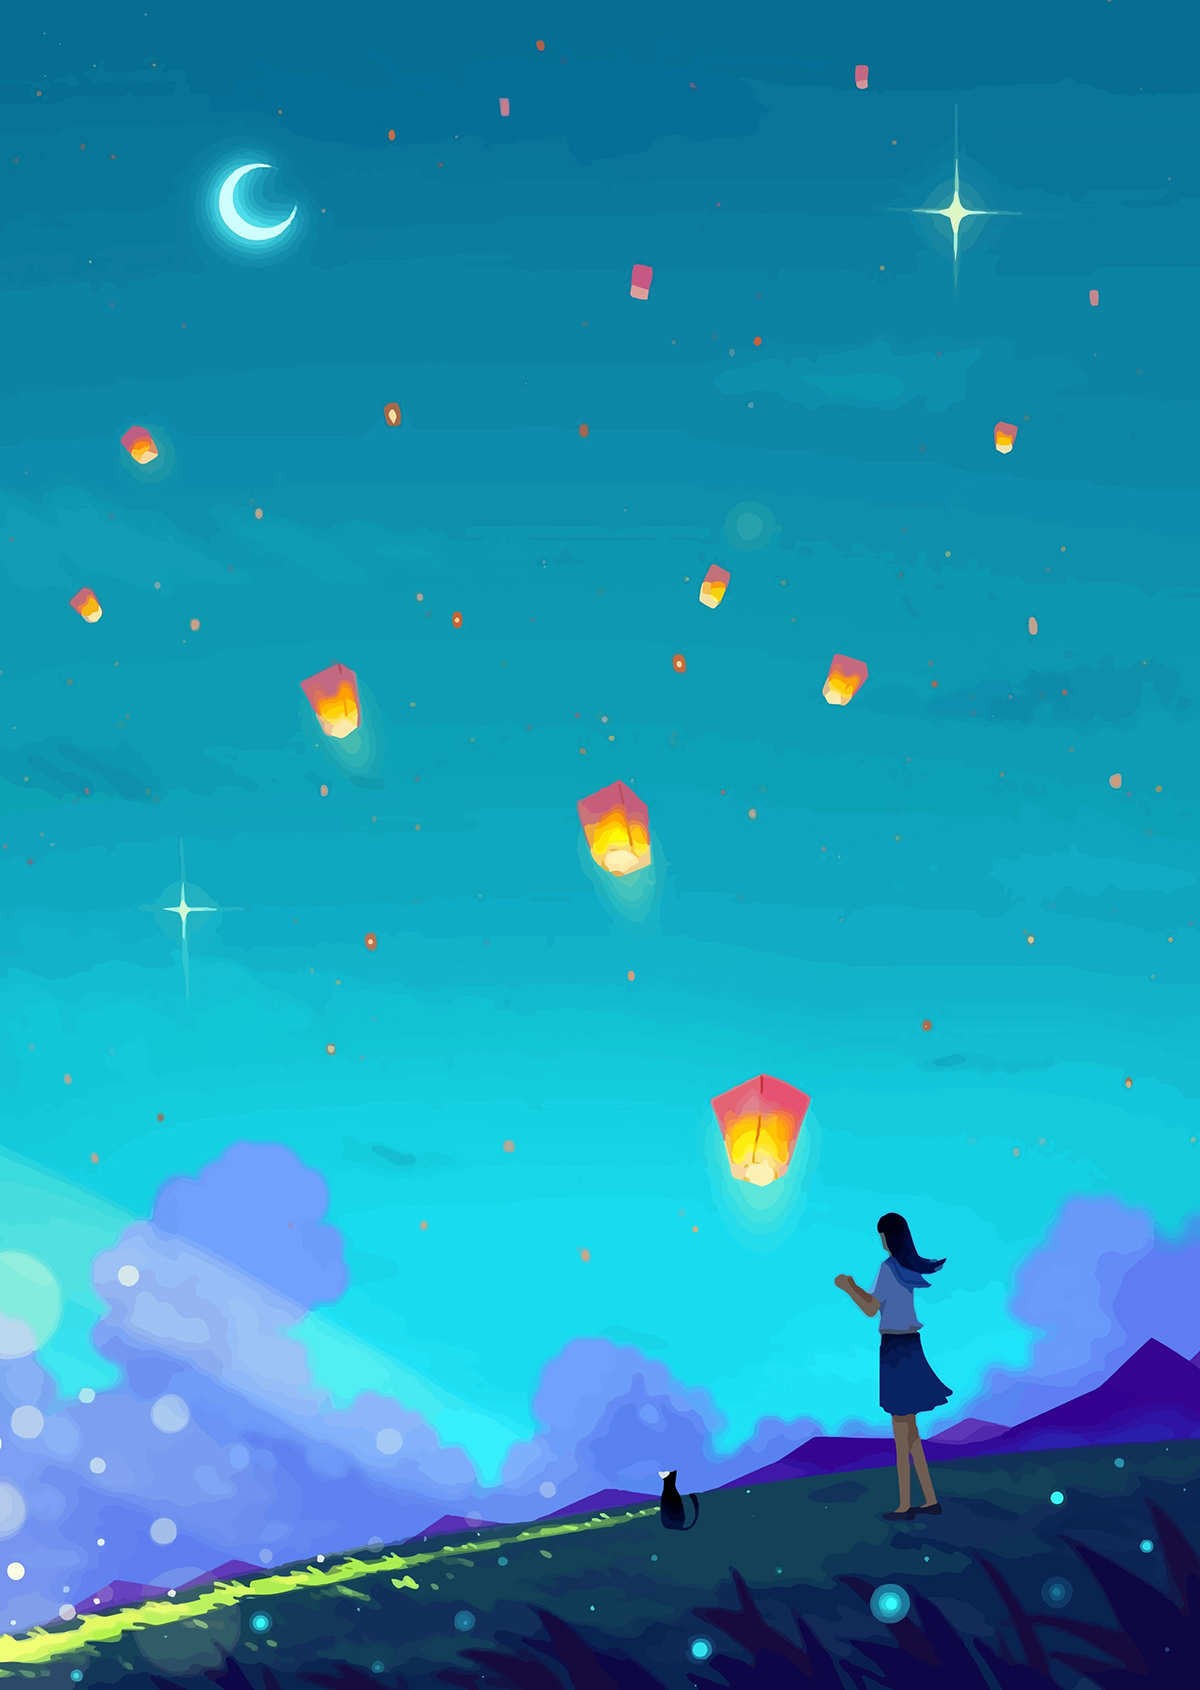 A girl standing on a hill with lanterns flying in the sky